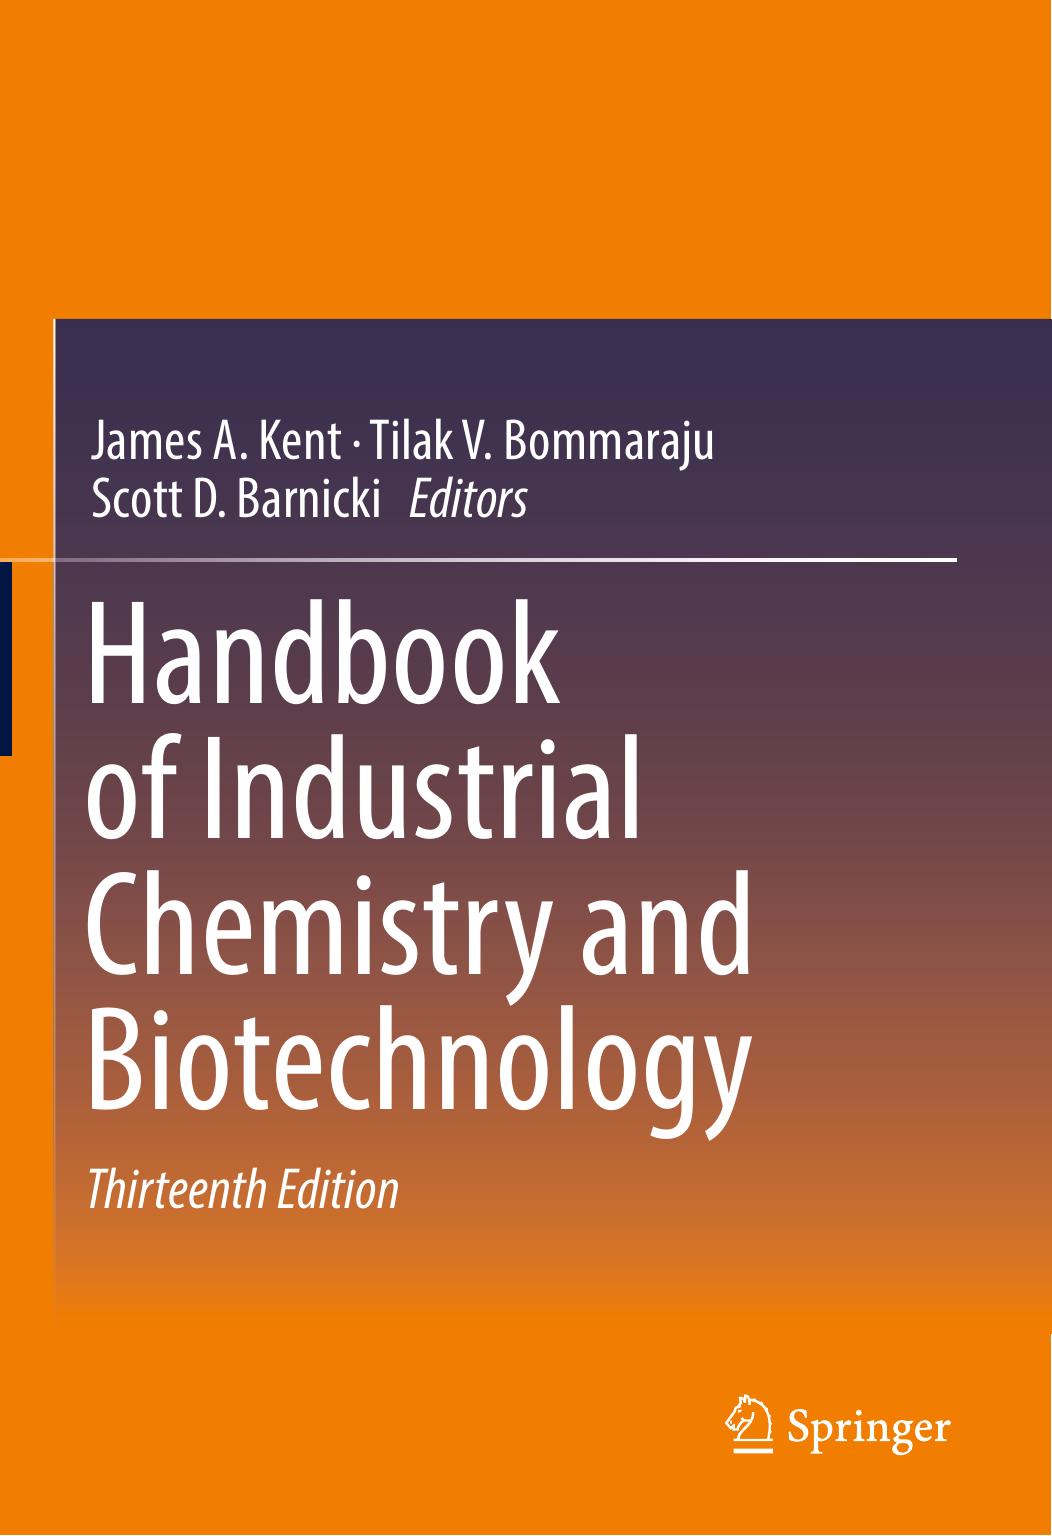 Handbook of industrial chemistry and biotechnology 2017